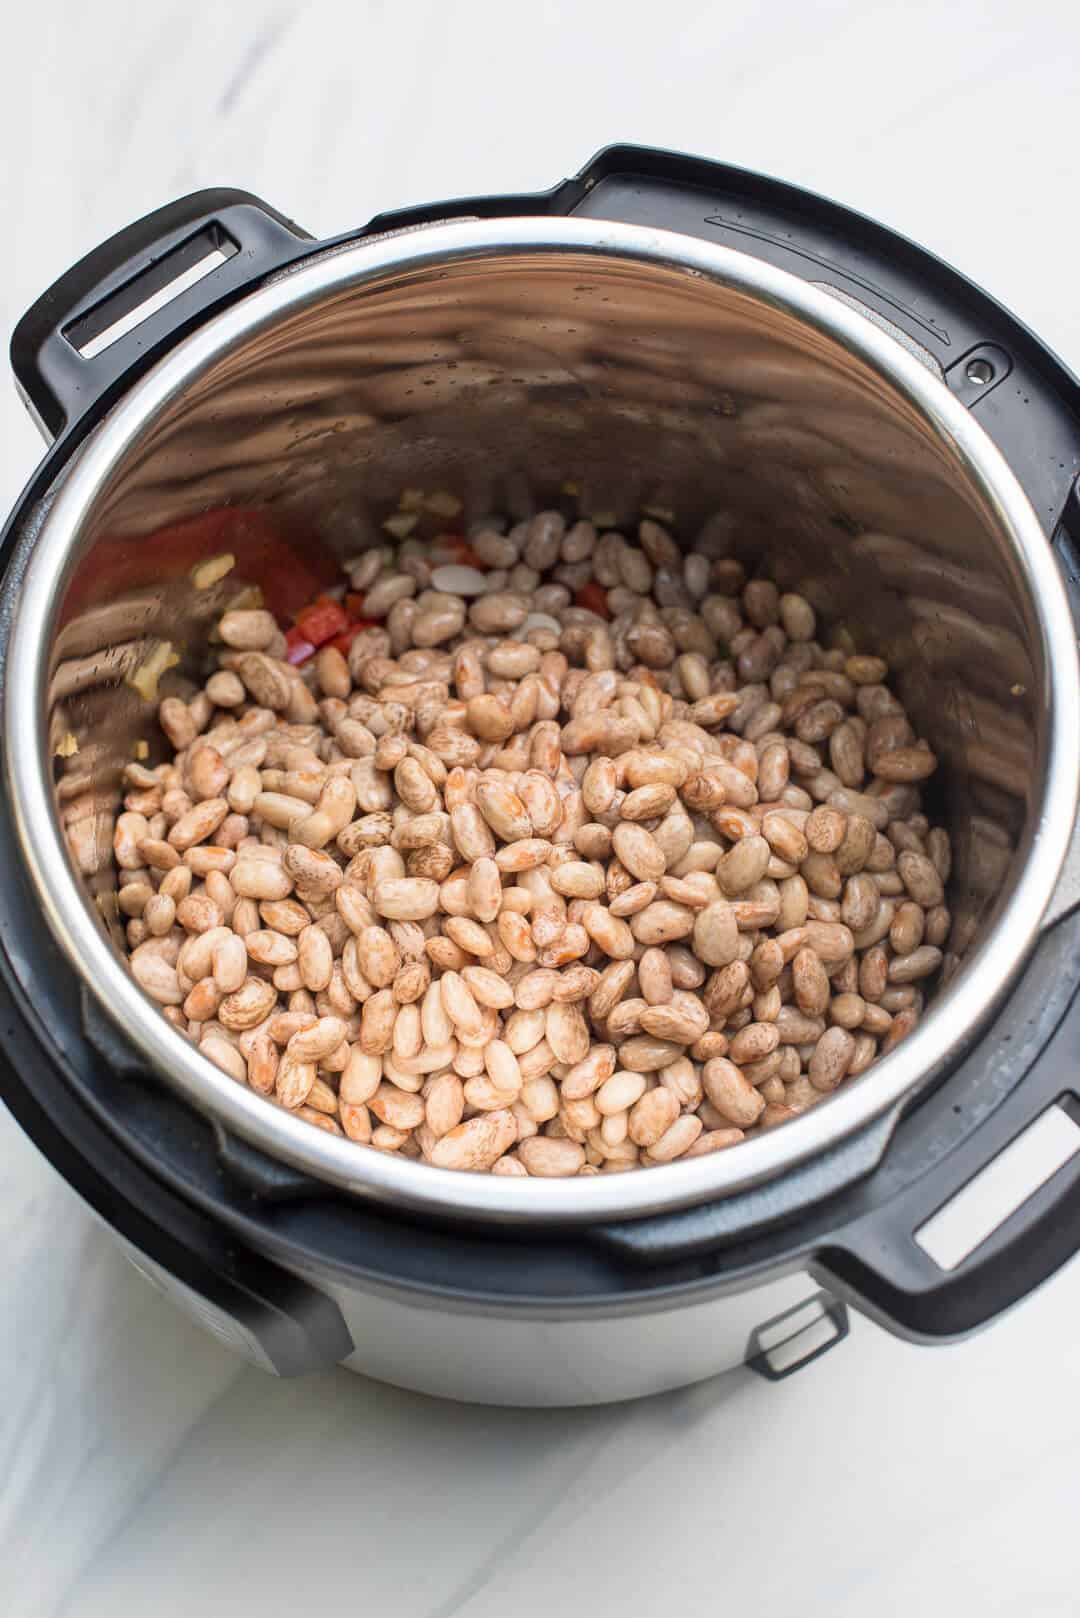 An over the top image showing the dry pinto beans added to the Instant Pot.